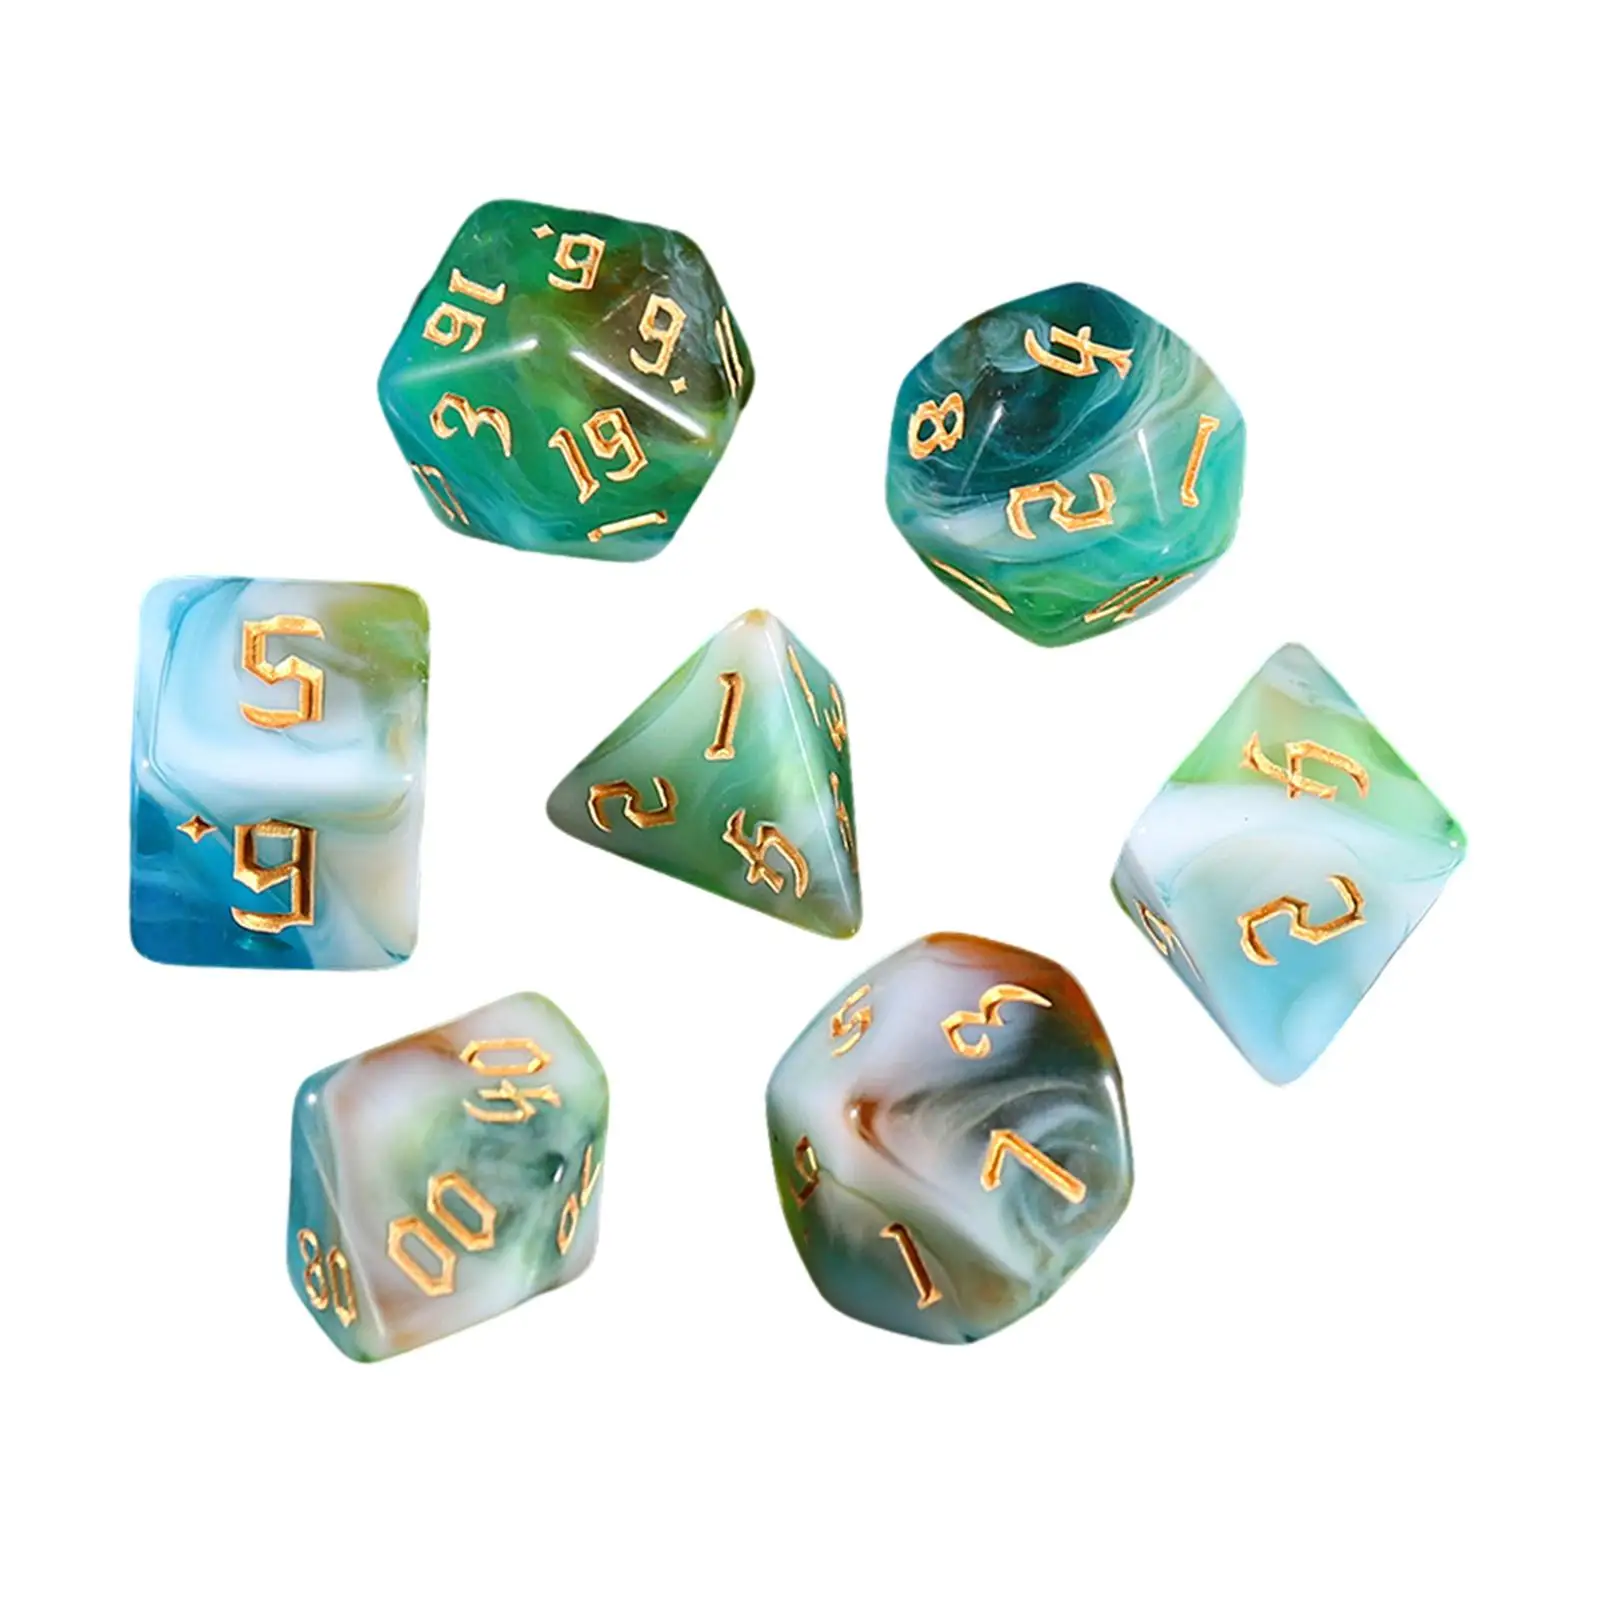 7 Pieces D4-d20 Dices Table Games Party Toys Acrylic Dices Multi Sided Dices for RPG Role Playing Card Games Math Teaching